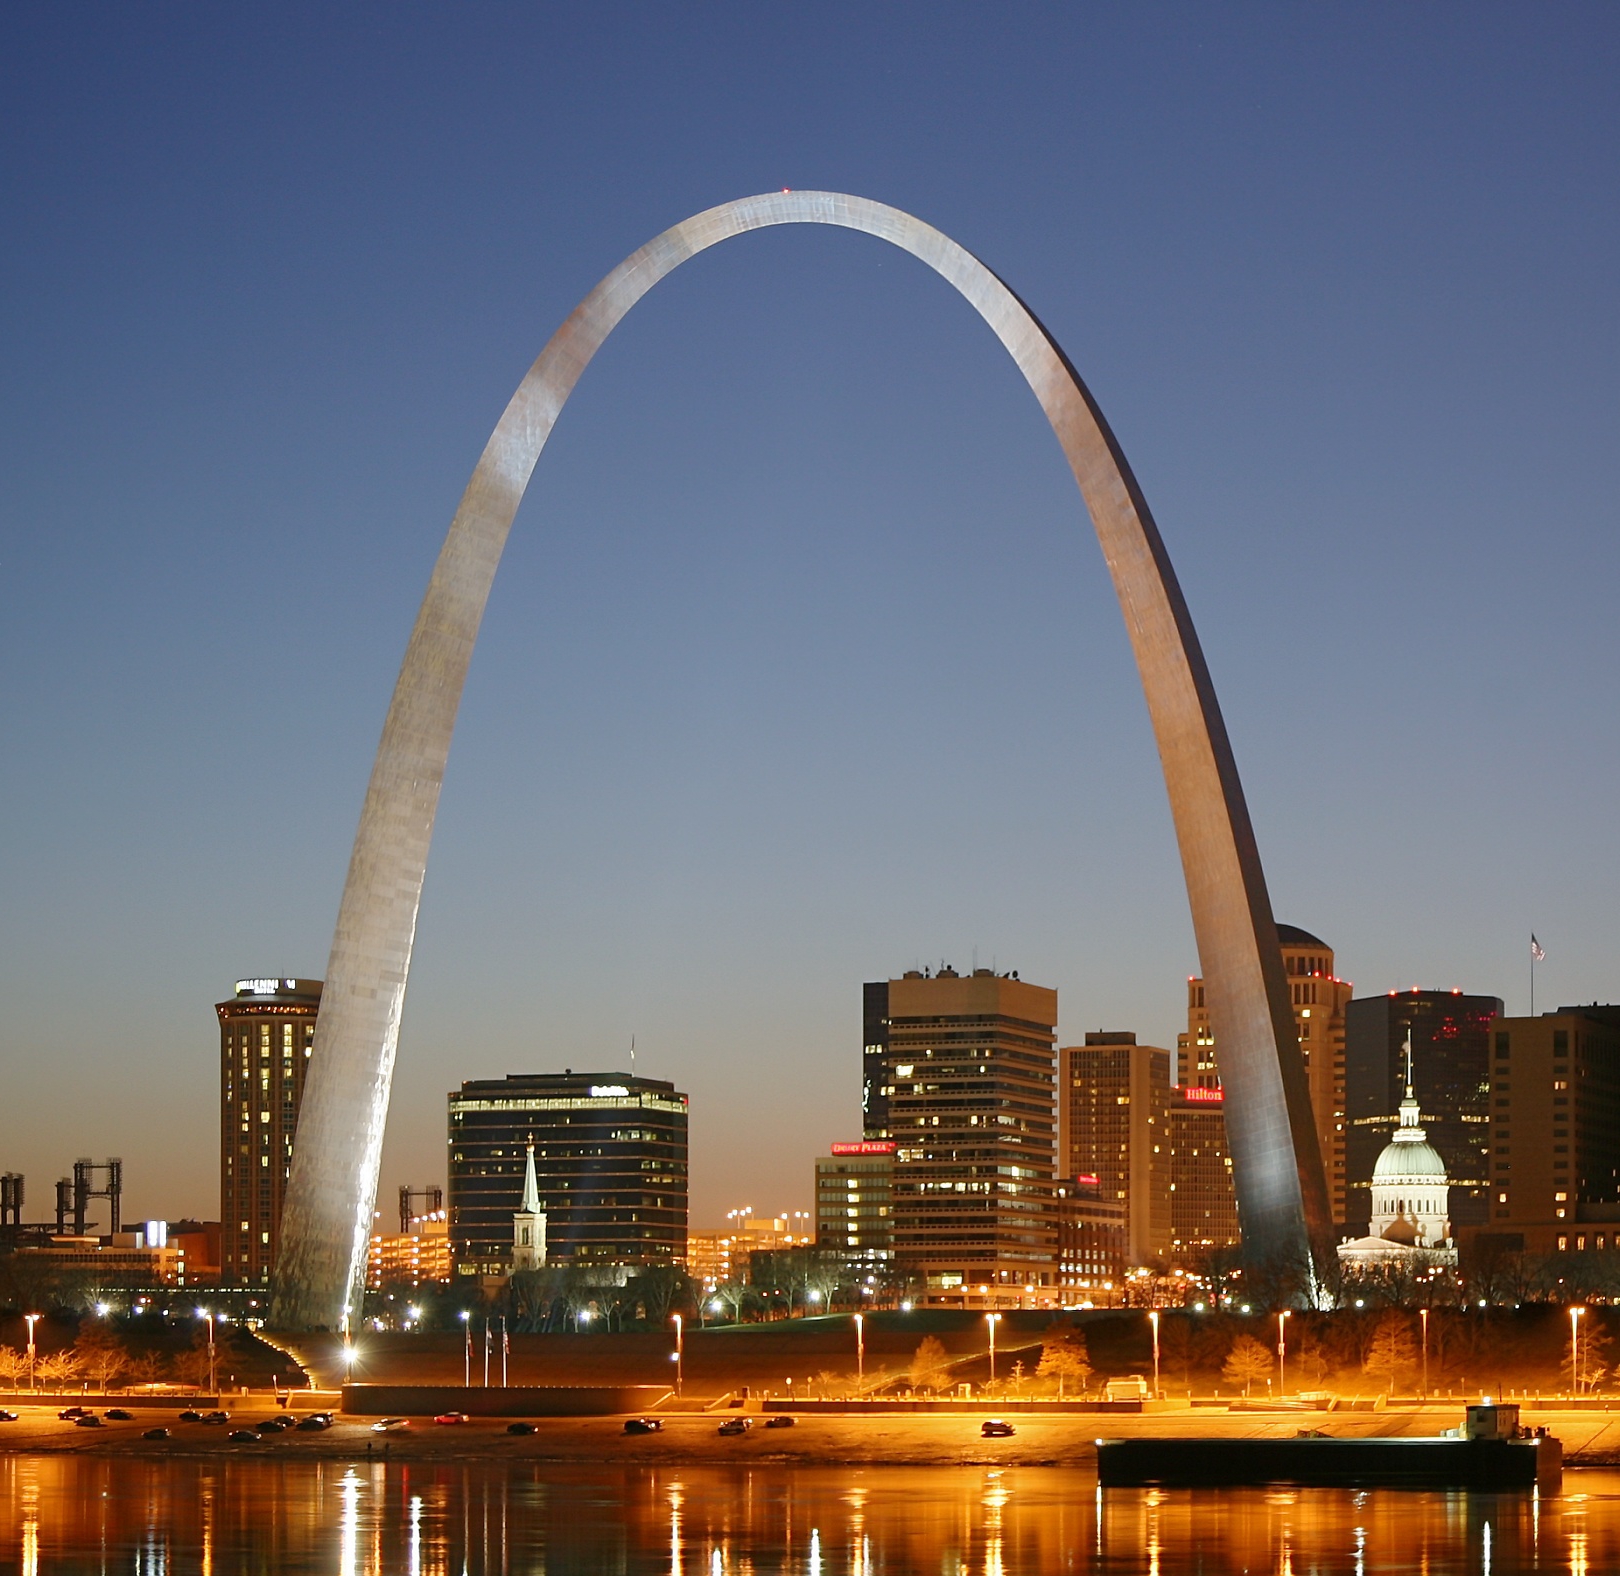 http://upload.wikimedia.org/wikipedia/commons/0/00/St_Louis_night_expblend_cropped.jpg